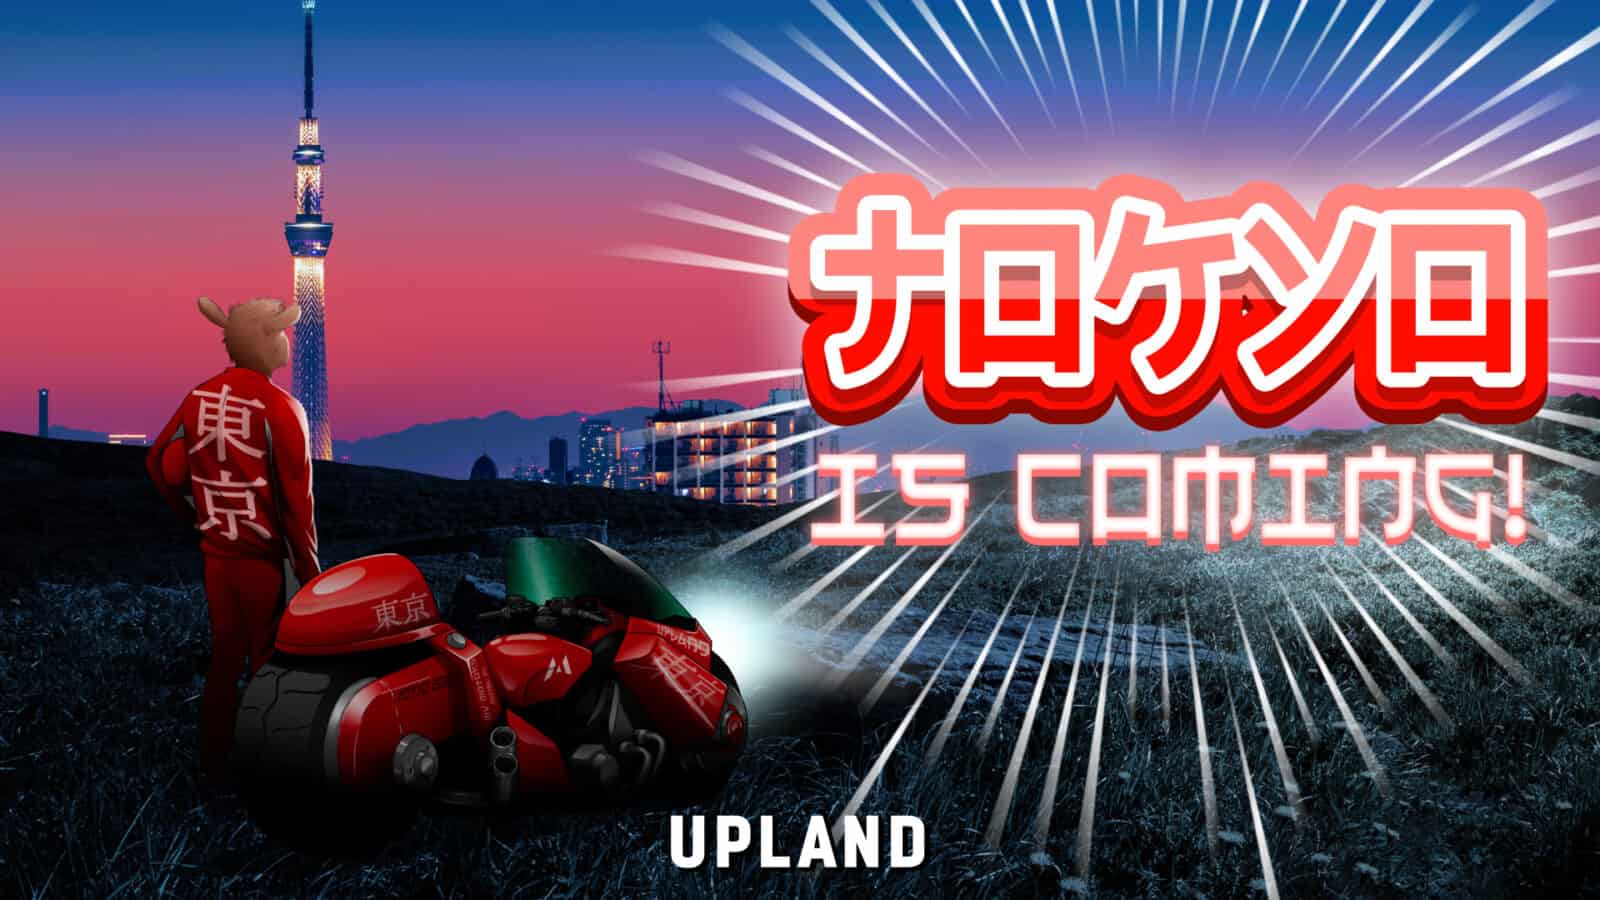 Upland Ventures into Tokyo with Over 20,000 Properties Up for Grabs